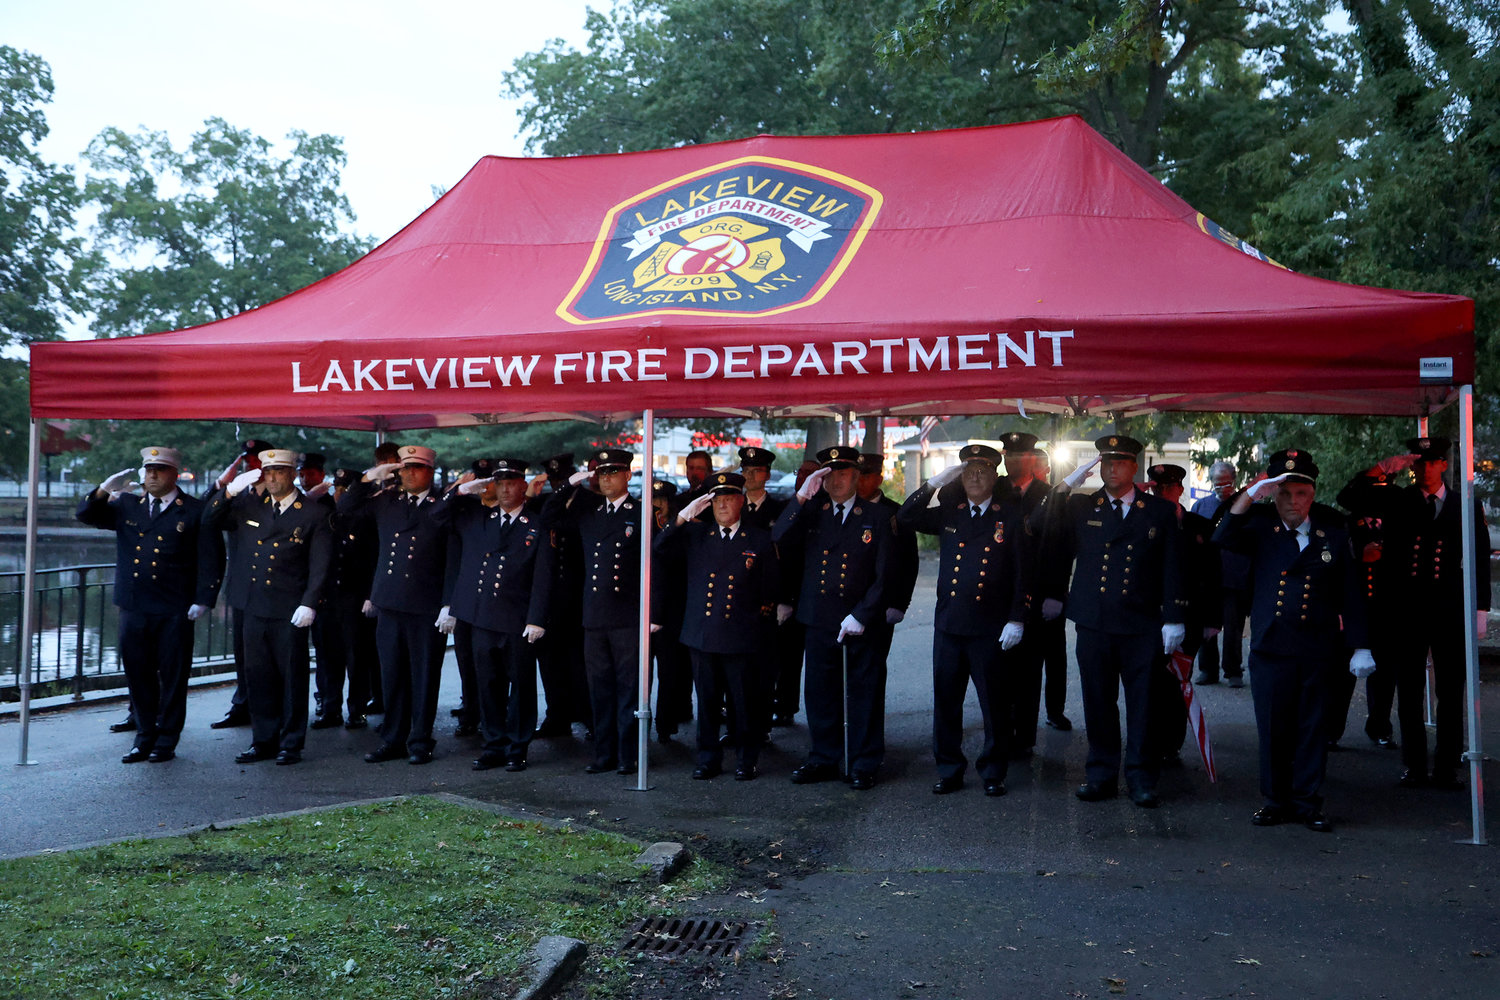 Members of the Lakeview Fire Department stood vigil in Hall’s Pond Park in West Hempstead in memory of those killed on Sept. 11, 2001, especially their fallen comrade Robert DeAngelis.